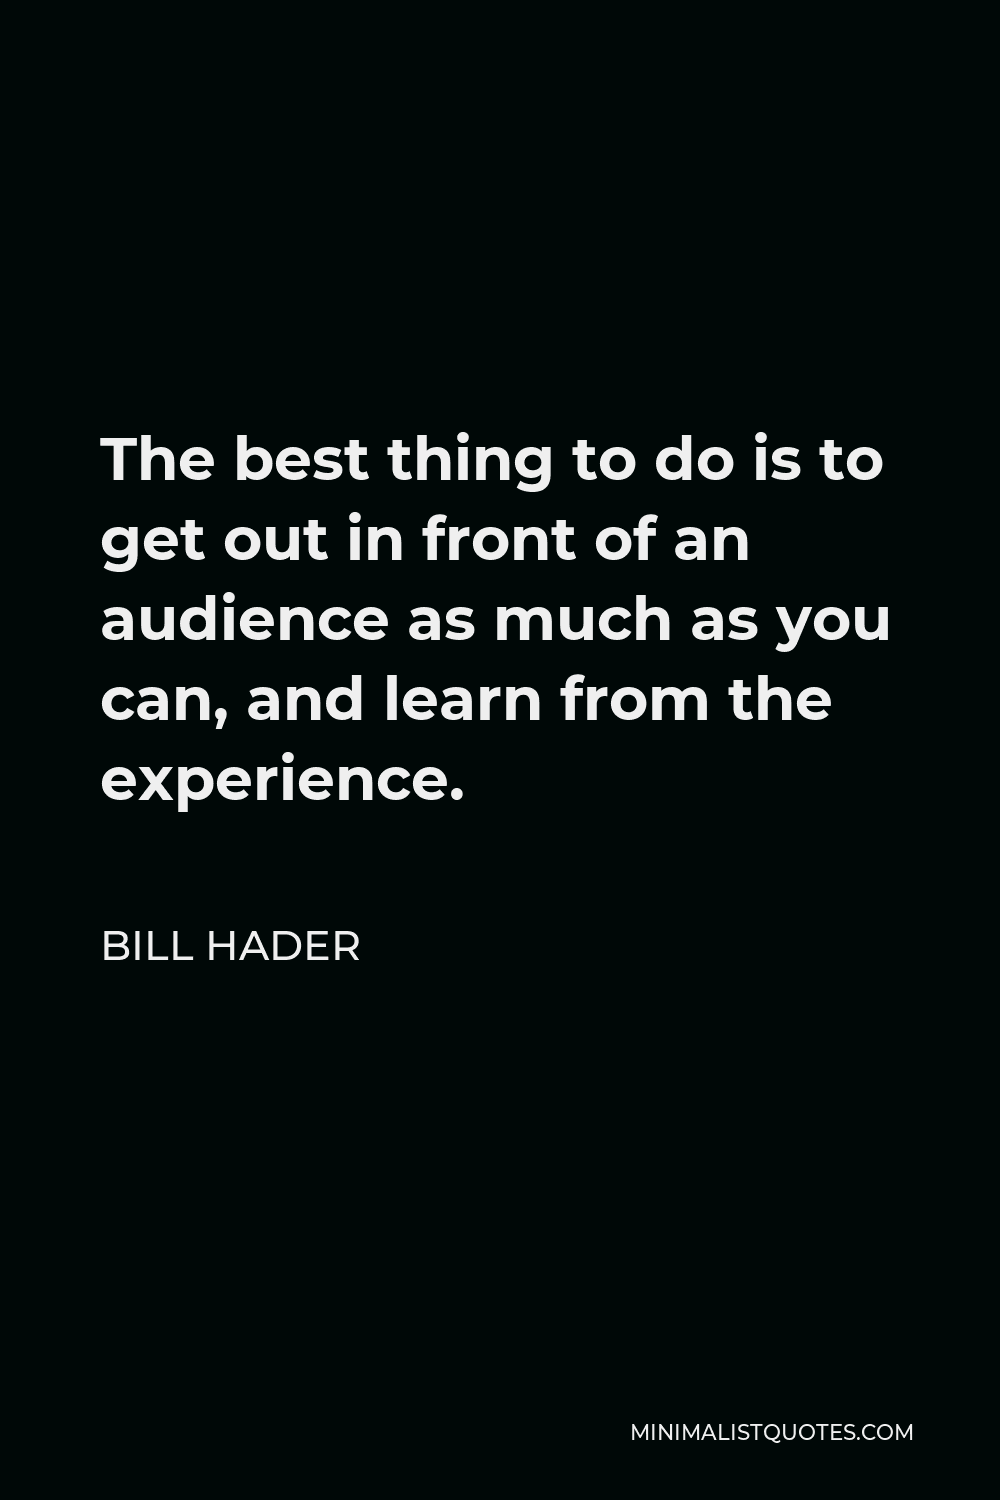 Bill Hader Quote - The best thing to do is to get out in front of an audience as much as you can, and learn from the experience.